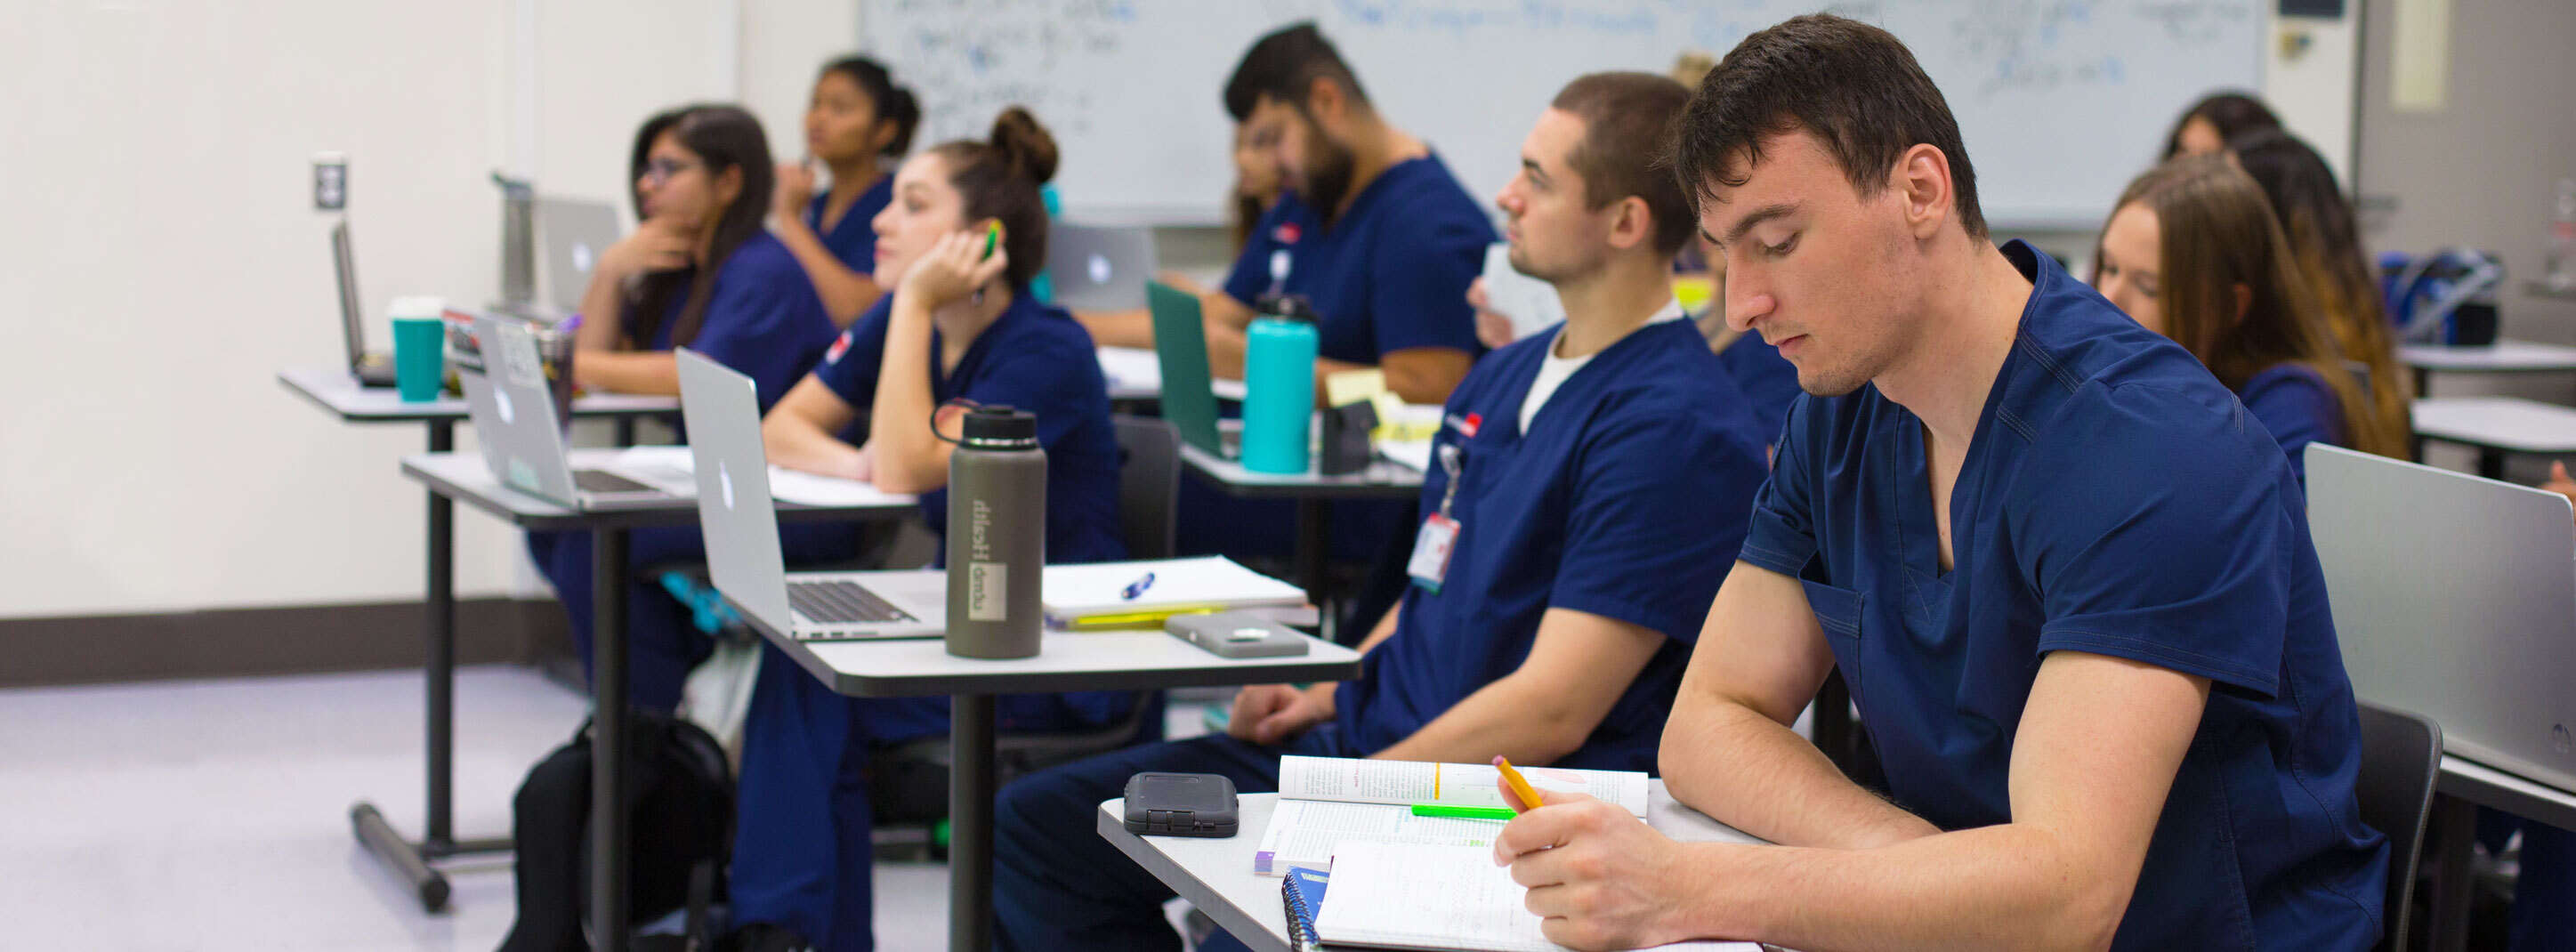 A group of students wearing scrubs and sitting at desks while taking lecture notes.